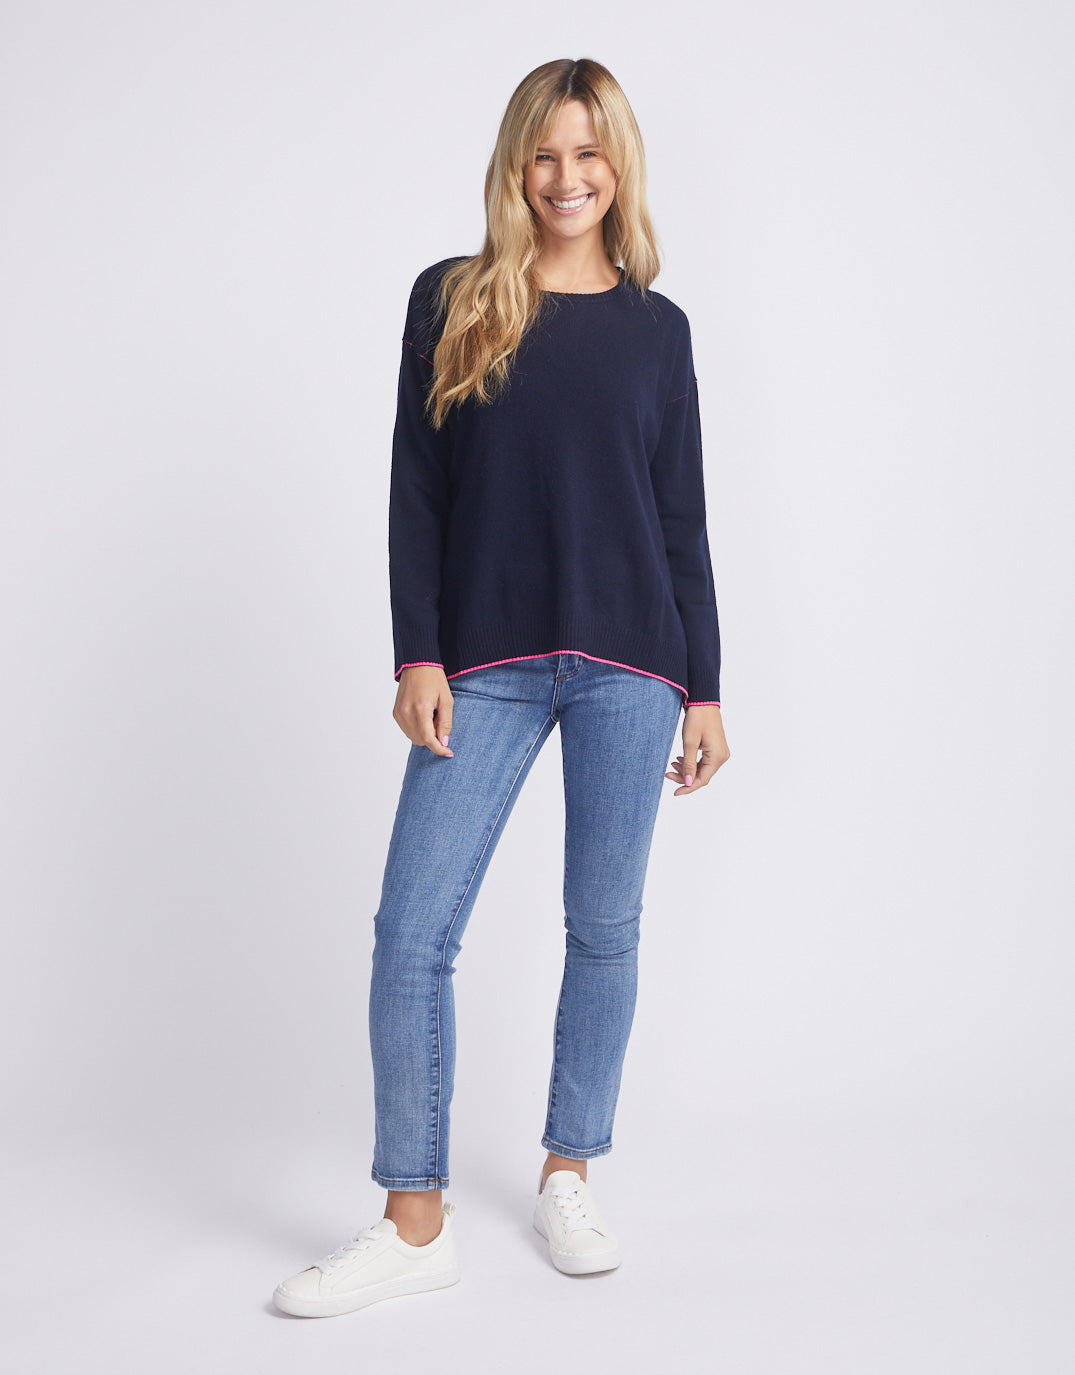 white-co-tribeca-wool-knit-navy-womens-clothing